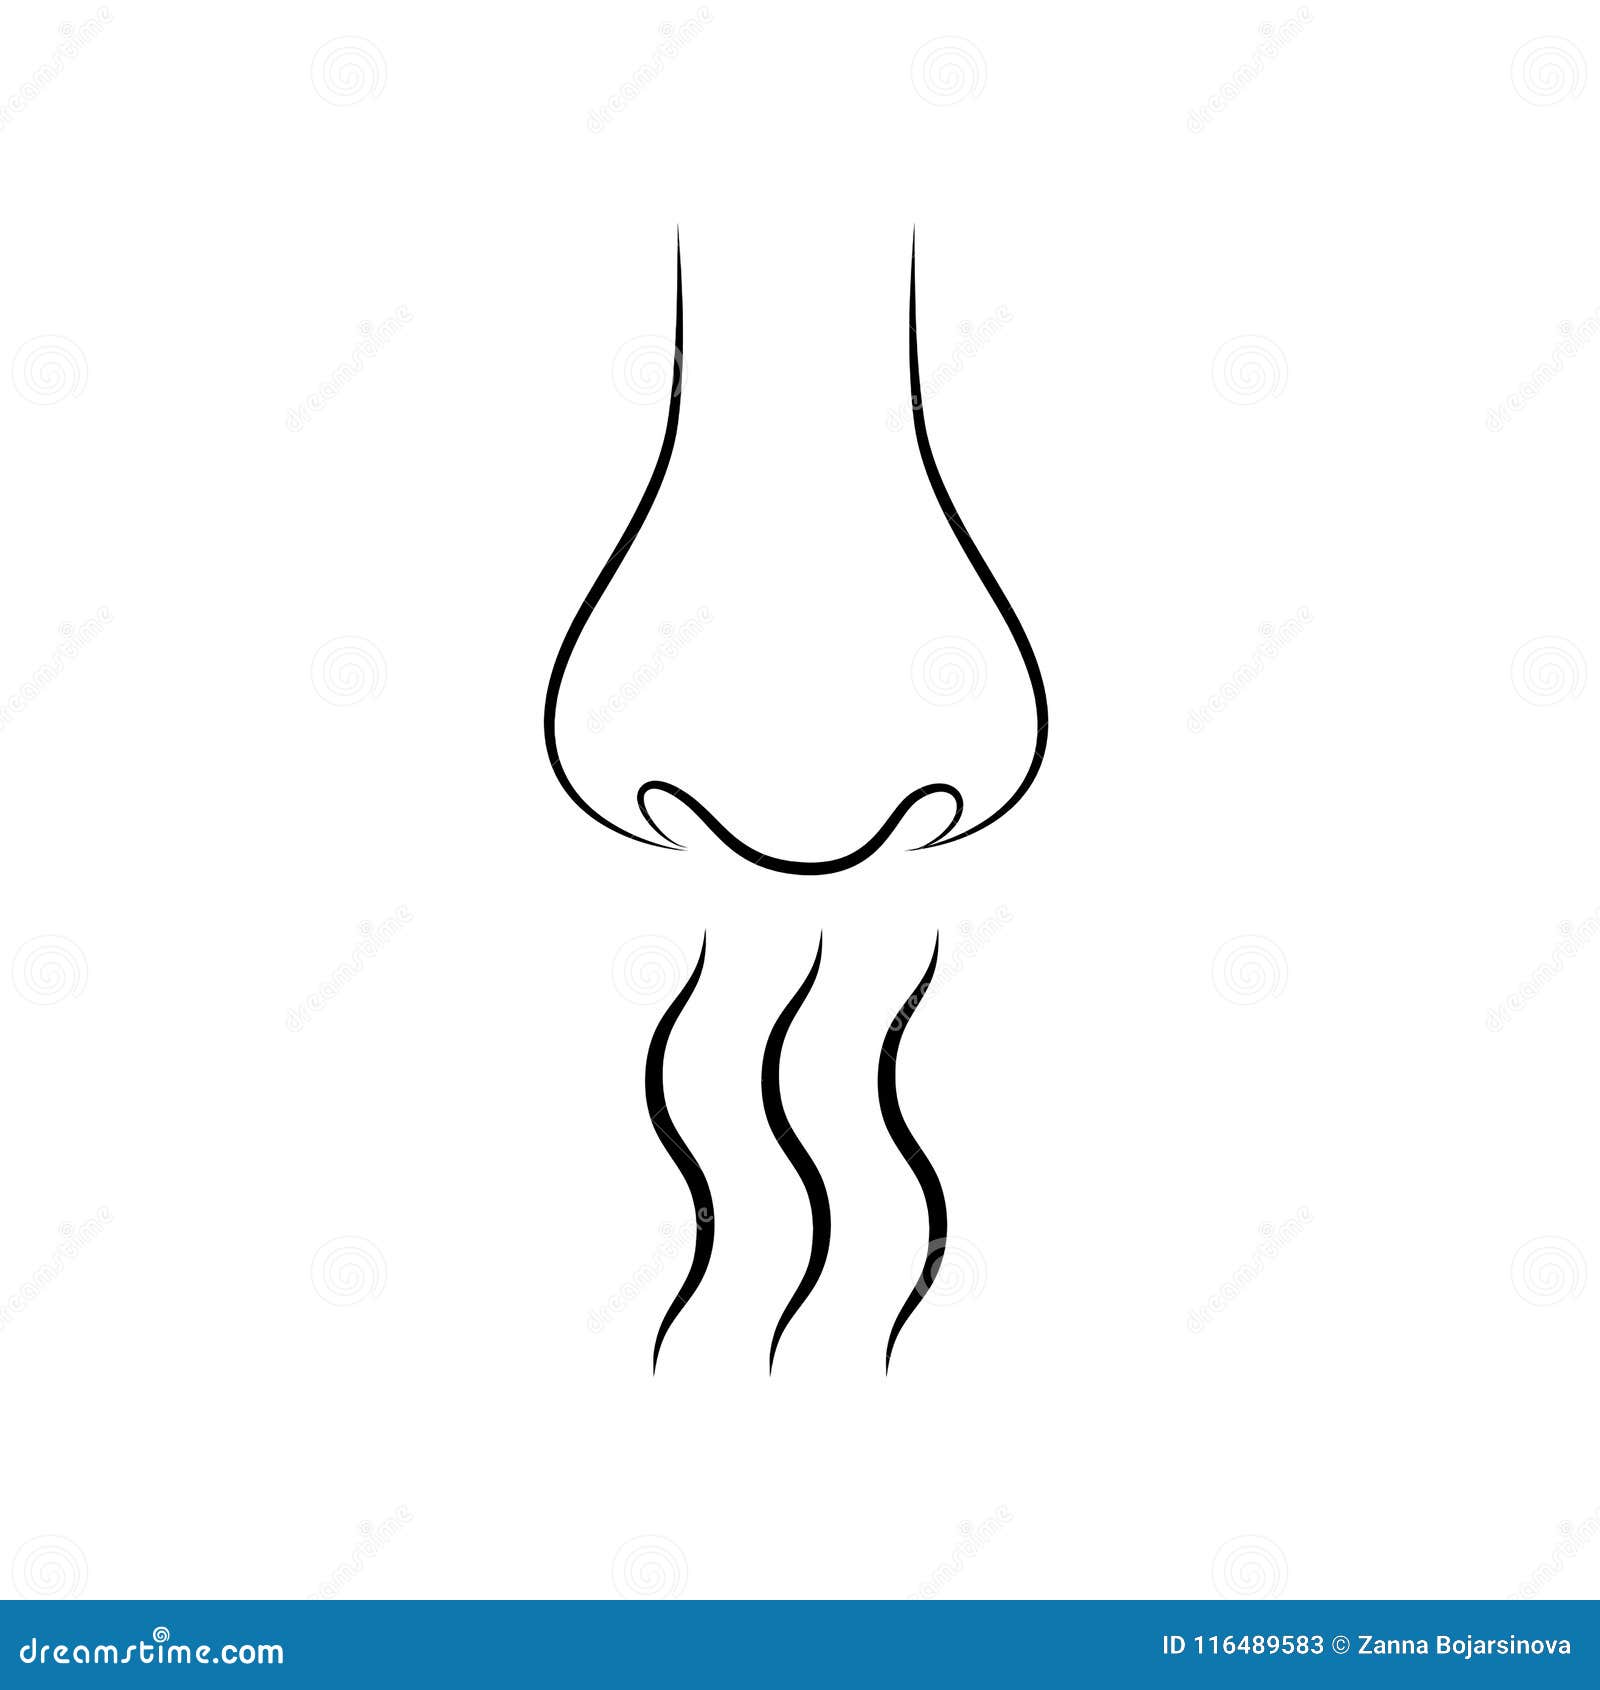 8899 Line Drawing Smell Images Stock Photos  Vectors  Shutterstock